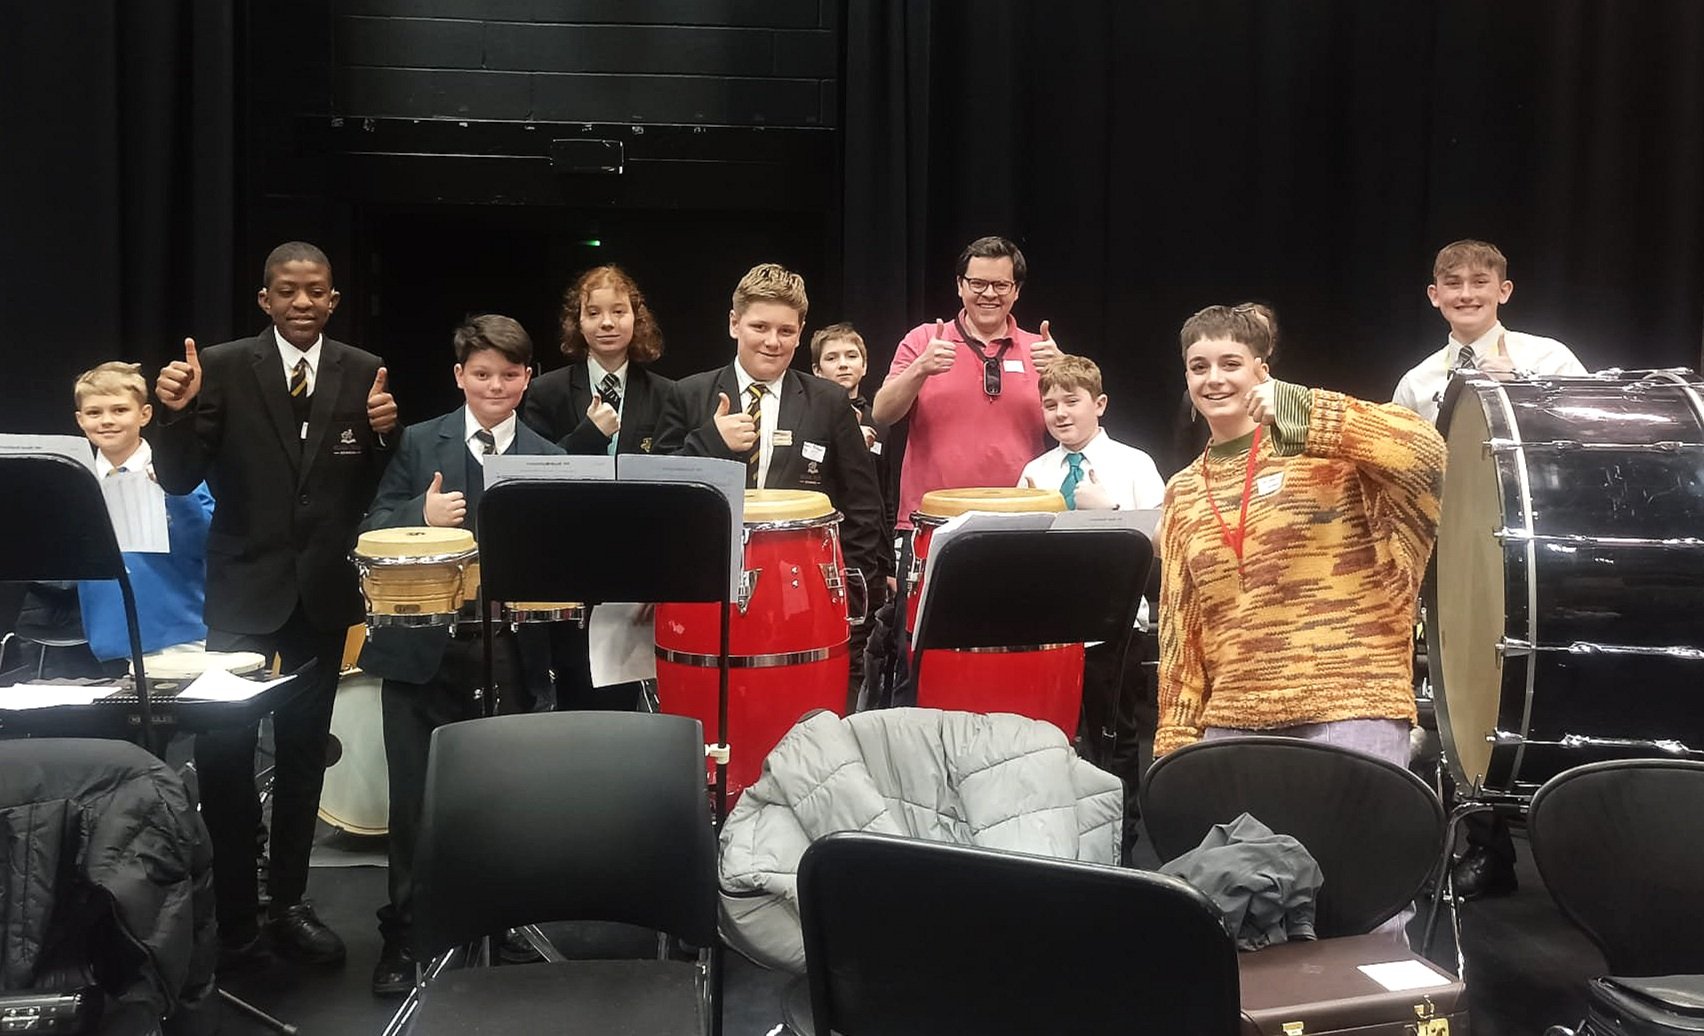 Pals in percussion